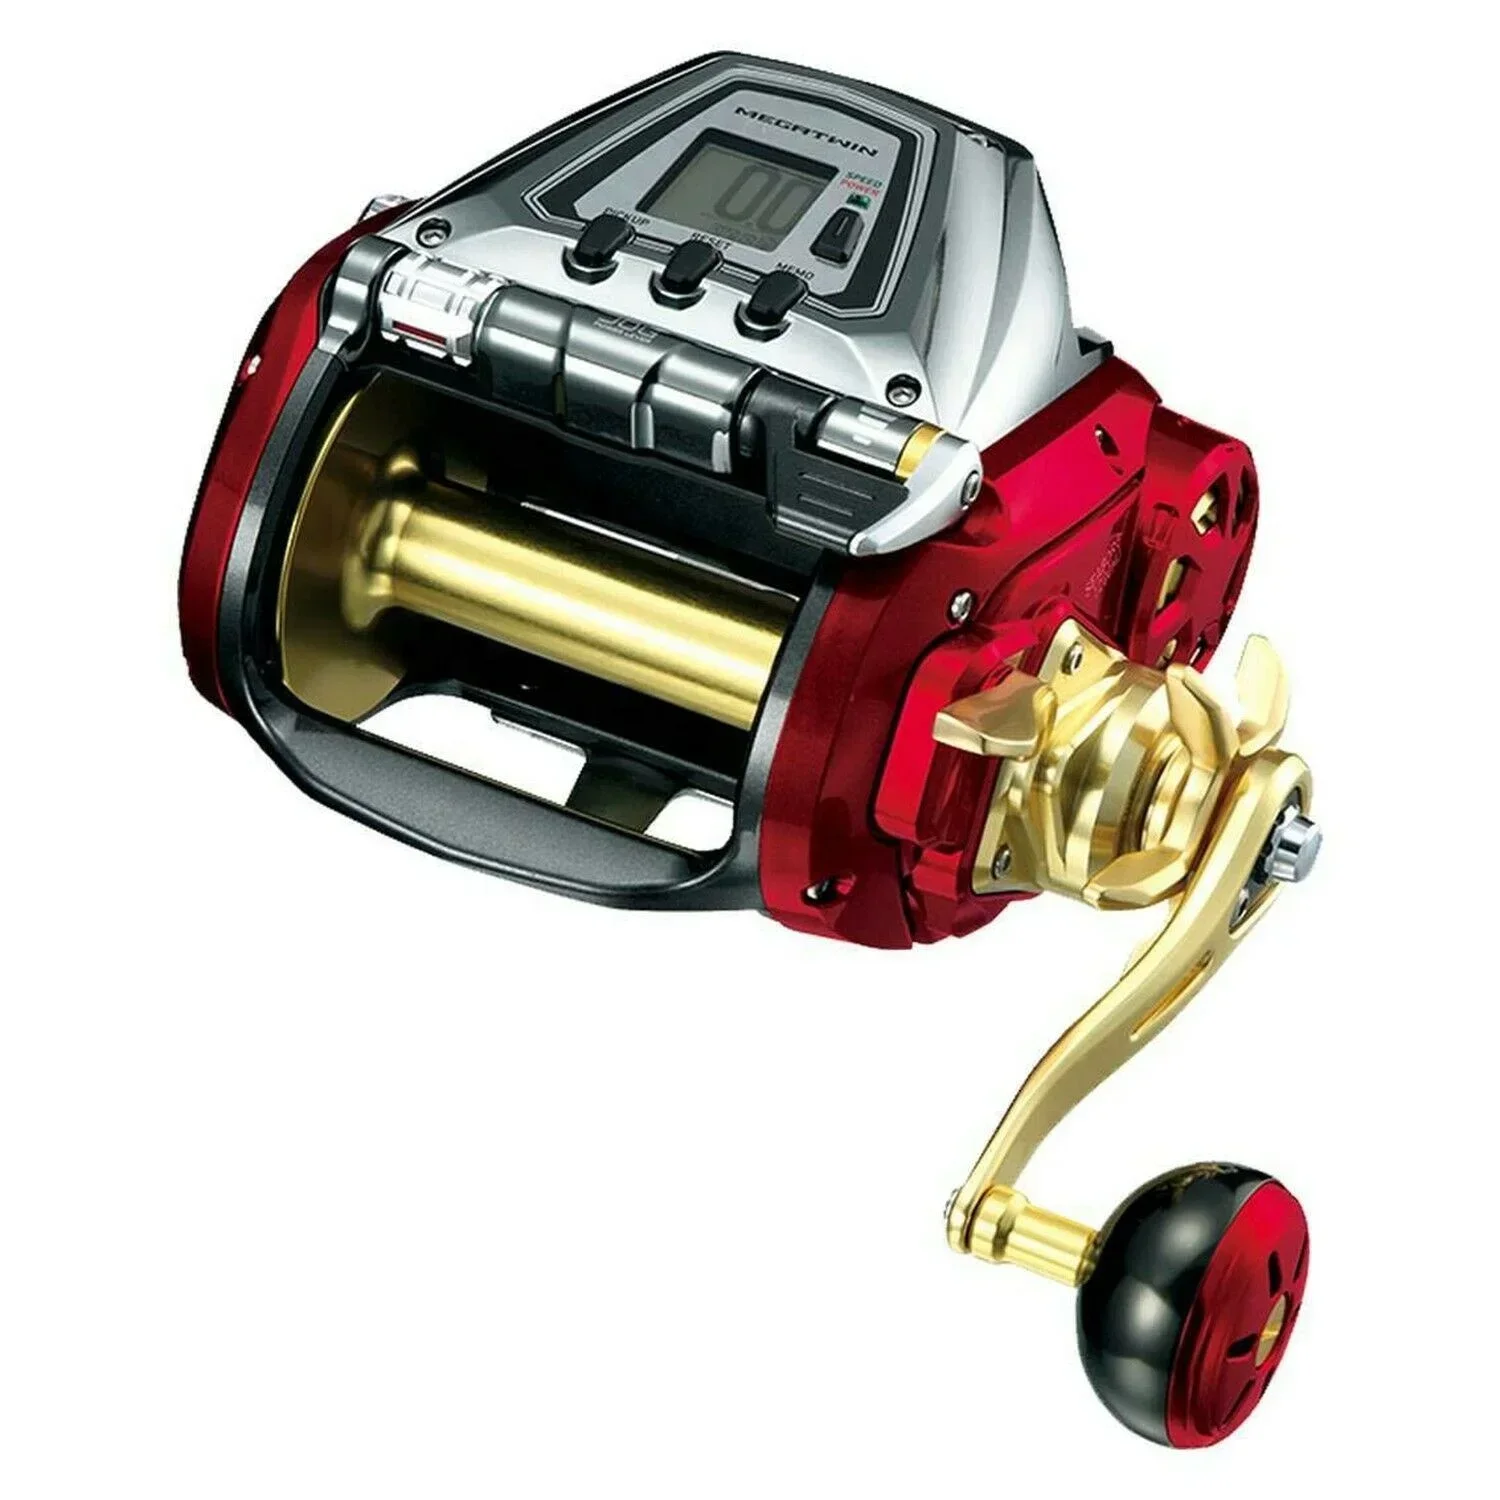 

SUMMER SALES DISCOUNT ON Buy With Confidence New Outdoor Activities SEABORG 1200MJ English Display Electric Reel